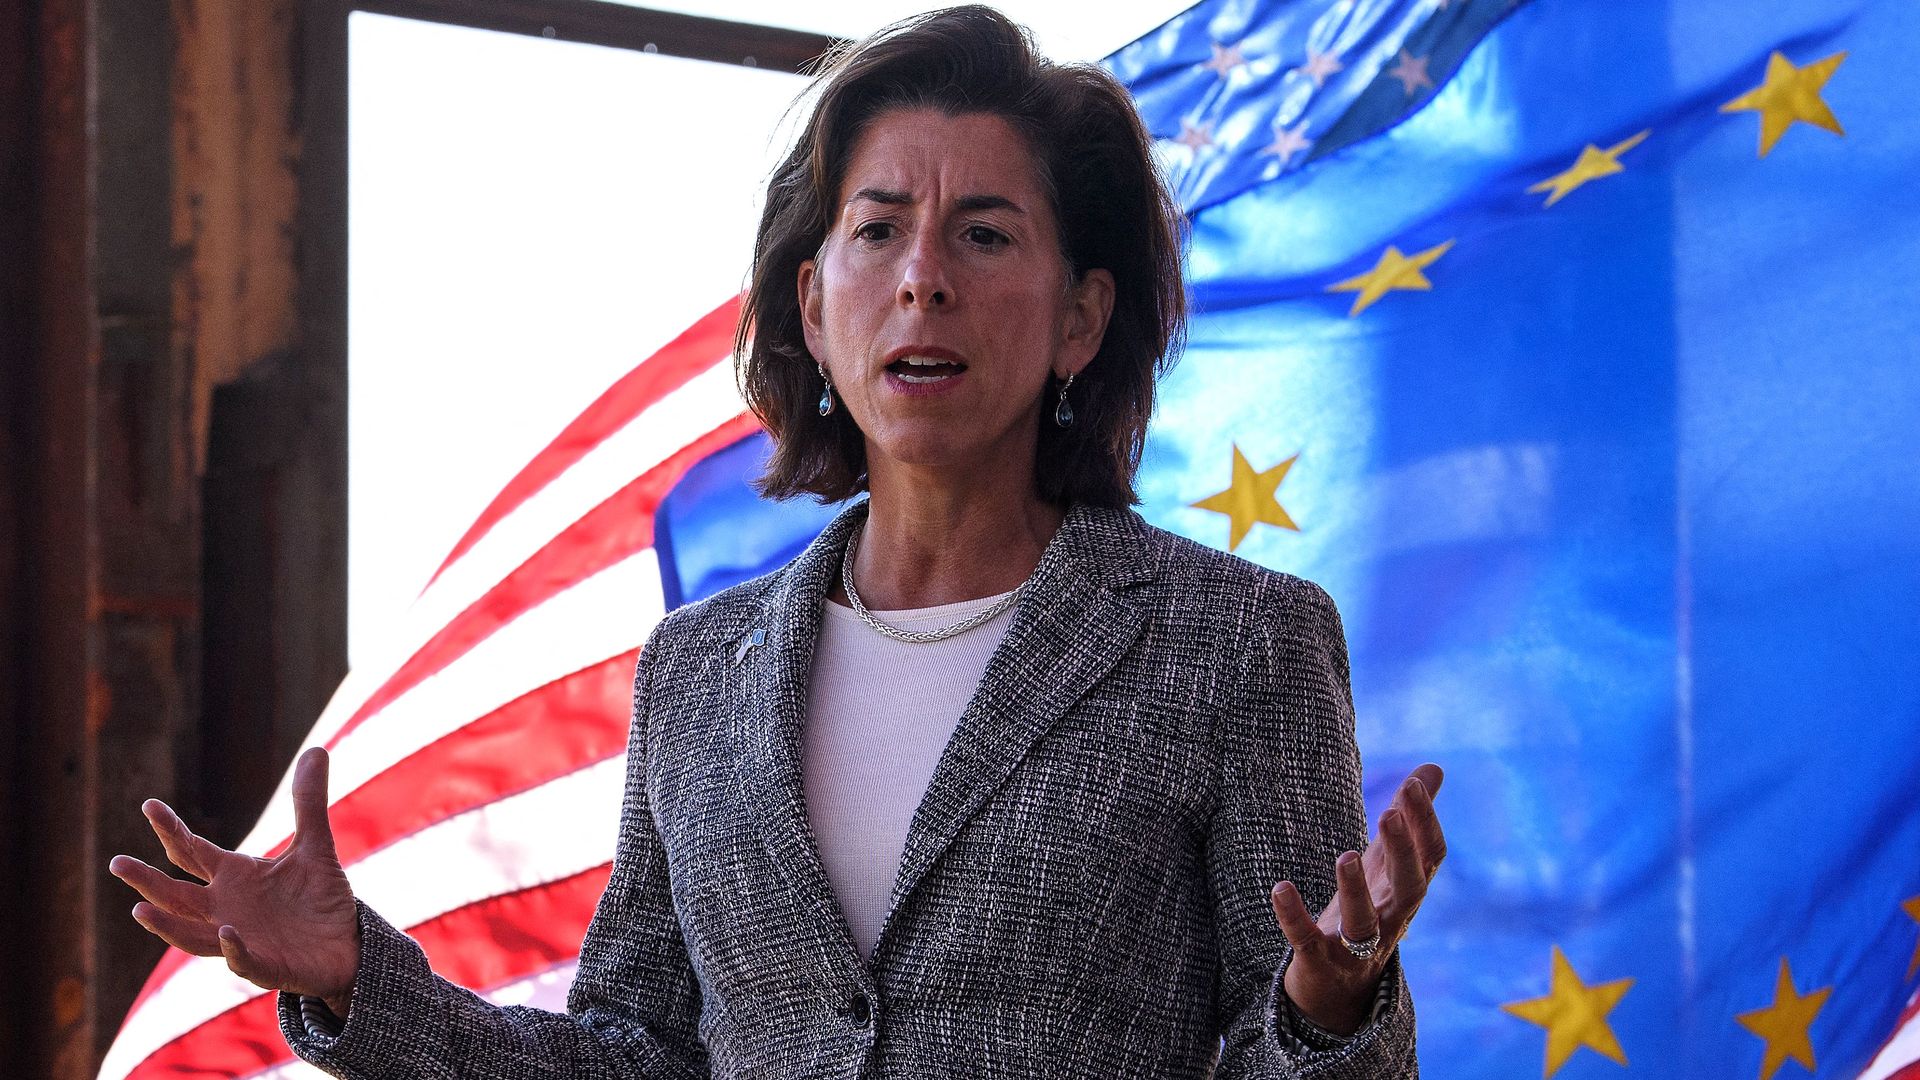 US Secretary of Commerce Gina Raimondo speaks to the press during the inaugural US-EU Trade and Technology Council in Pittsburgh, Pennsylvania, on September 29, 2021.